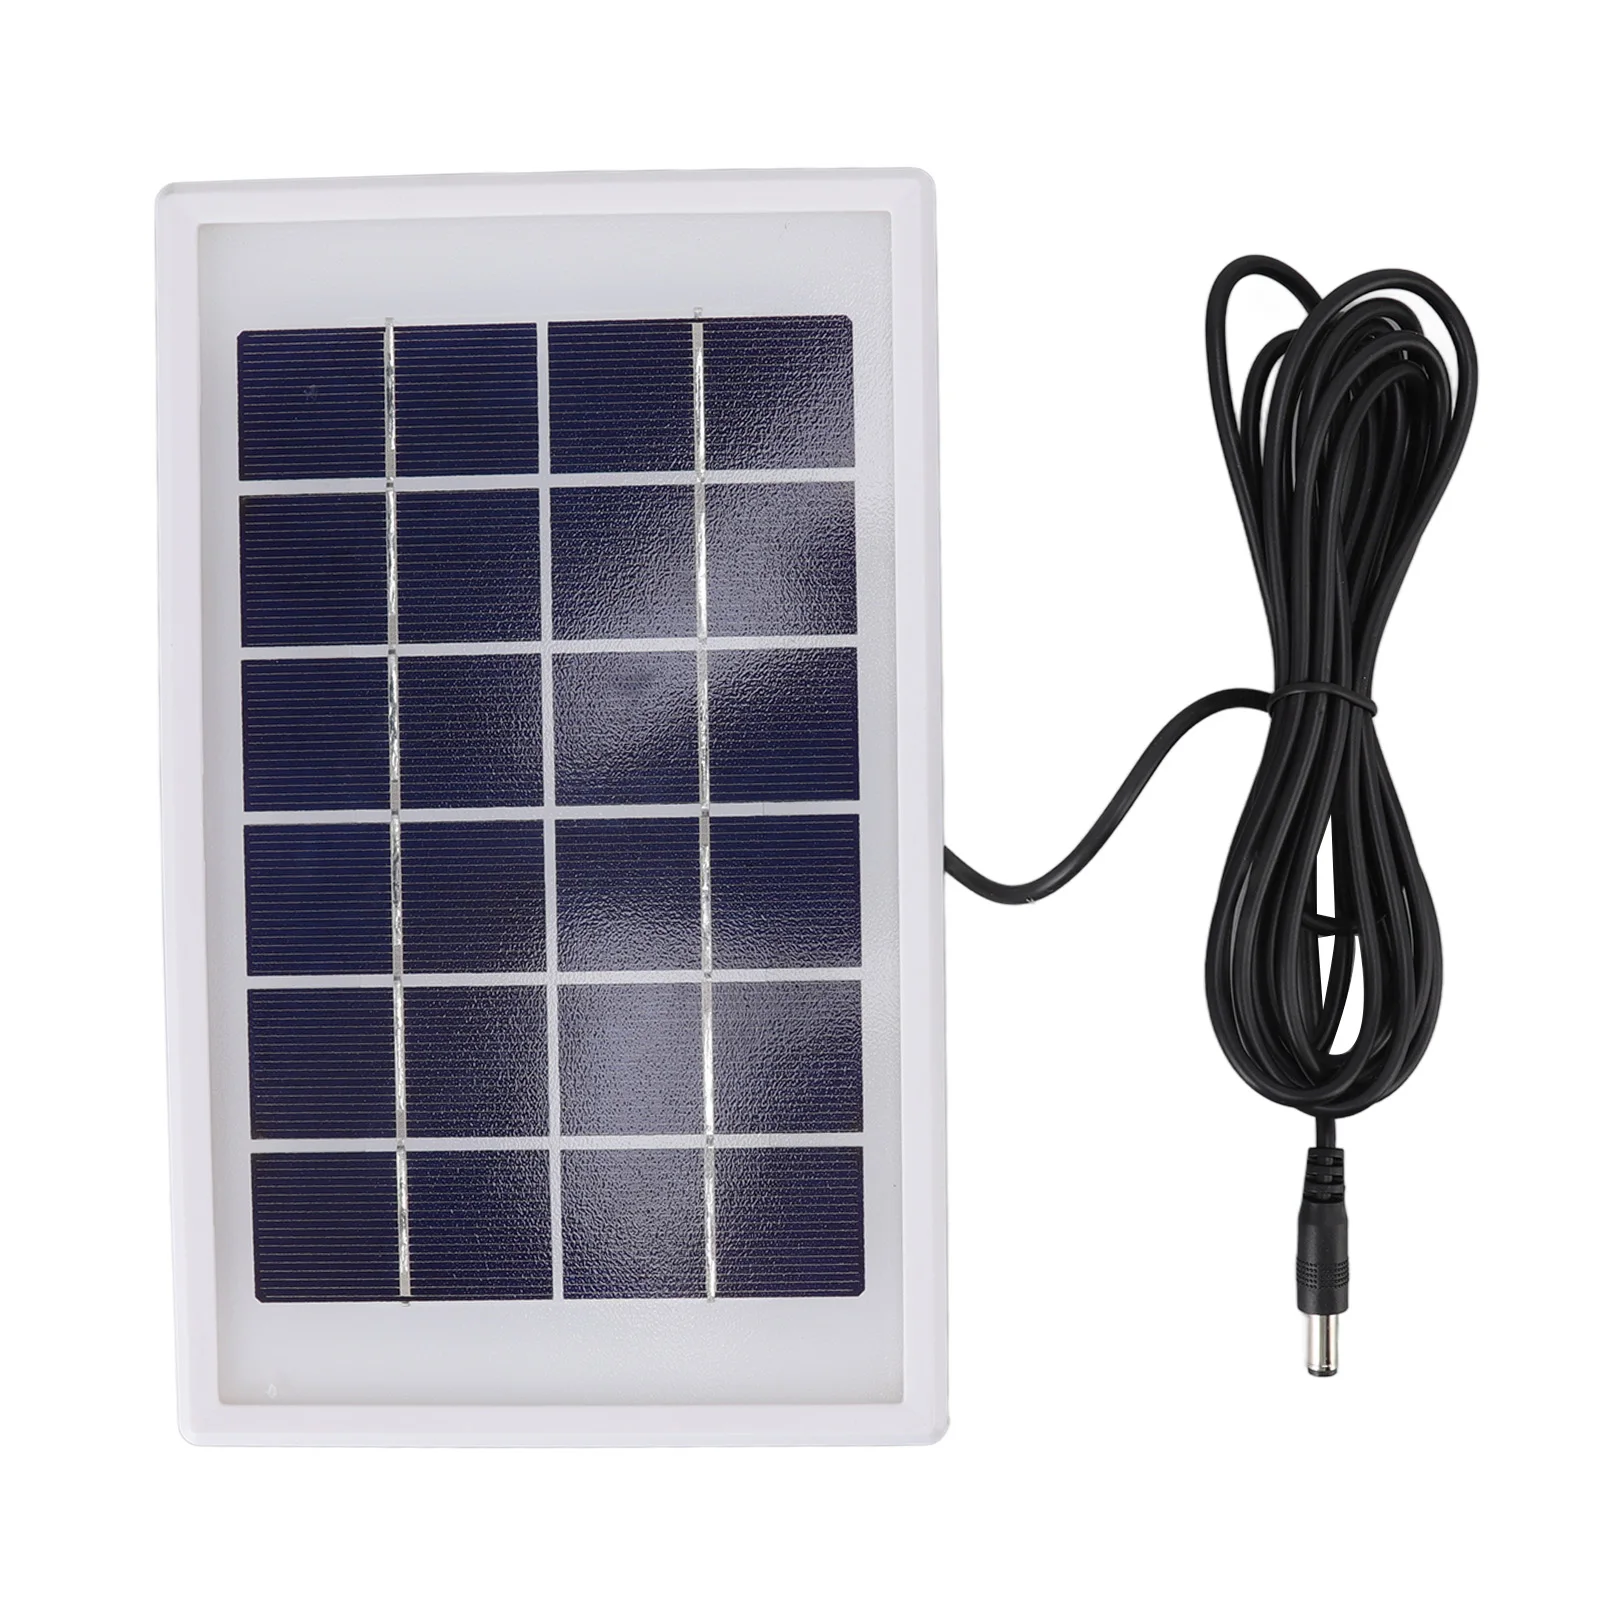 

3W 6V Solar Panel High Conversion Efficiency Semi Flexible Polycrystalline Silicon Solar Panels for Cars Ships Planting Tourism